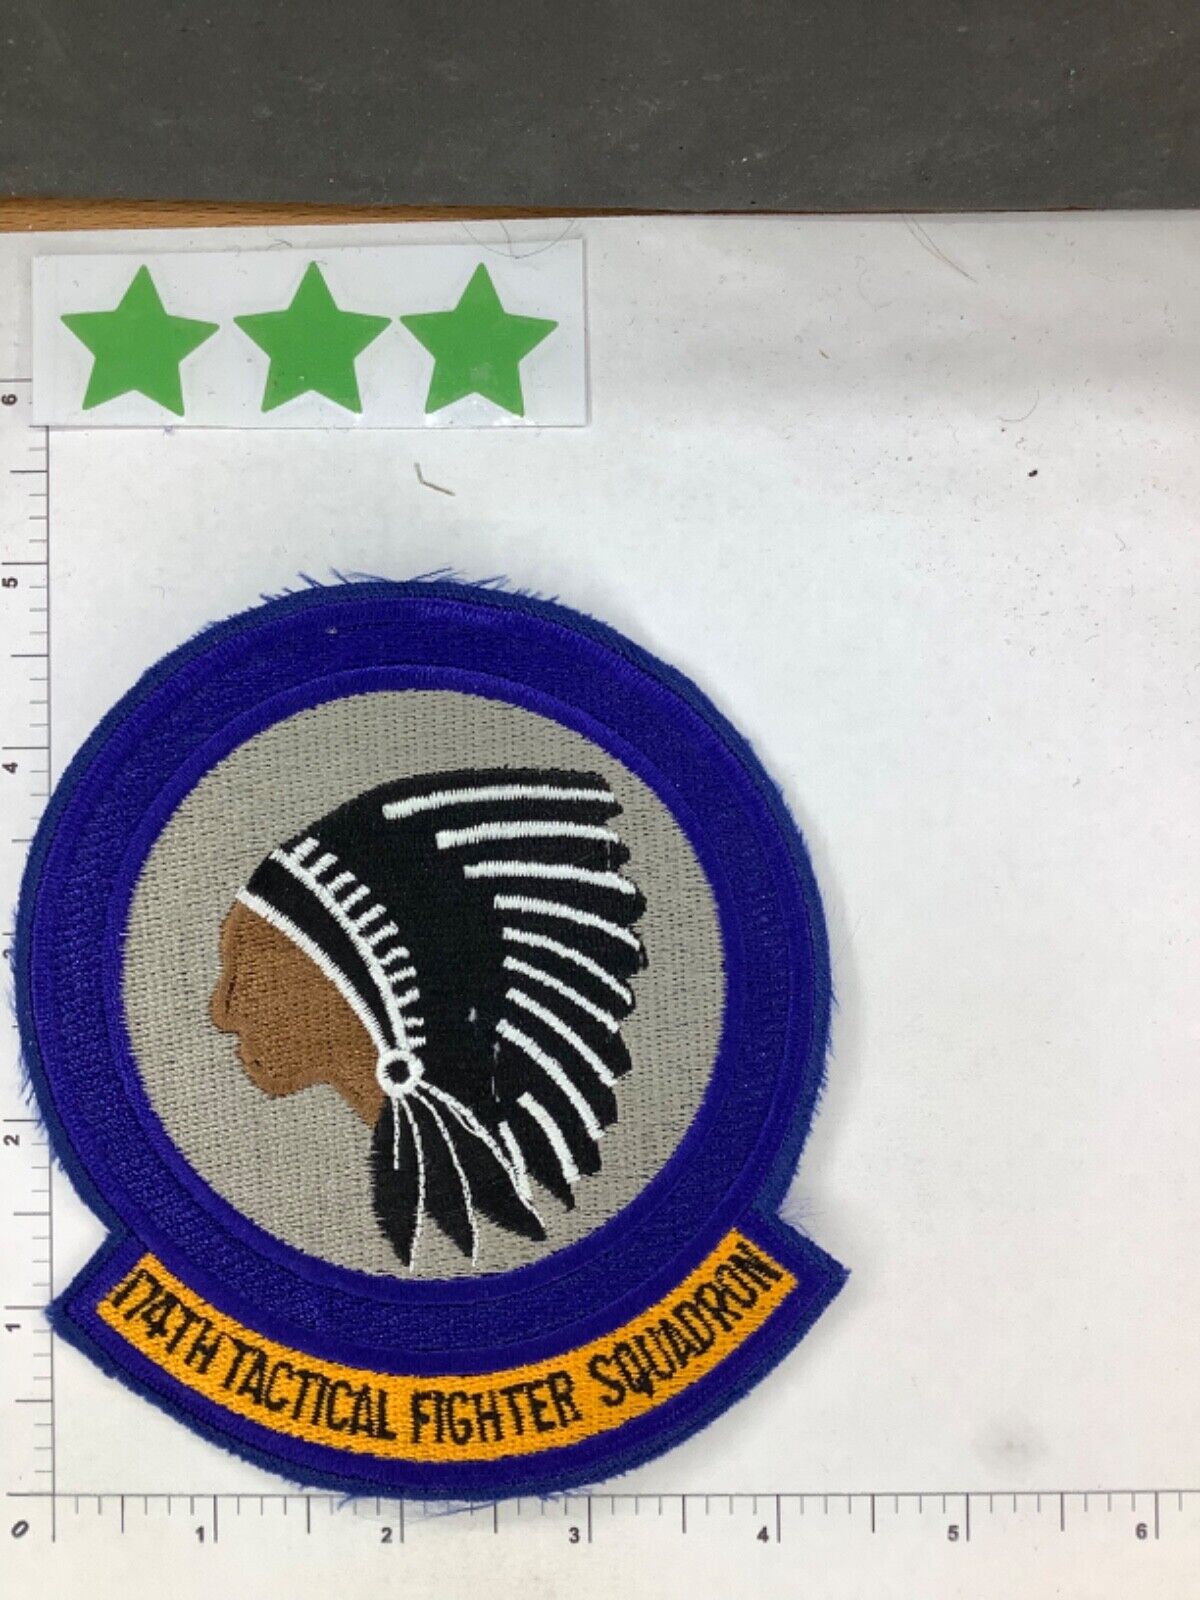 USAF 174TH TACTICAL FIGHTER SQUADRON PATCH